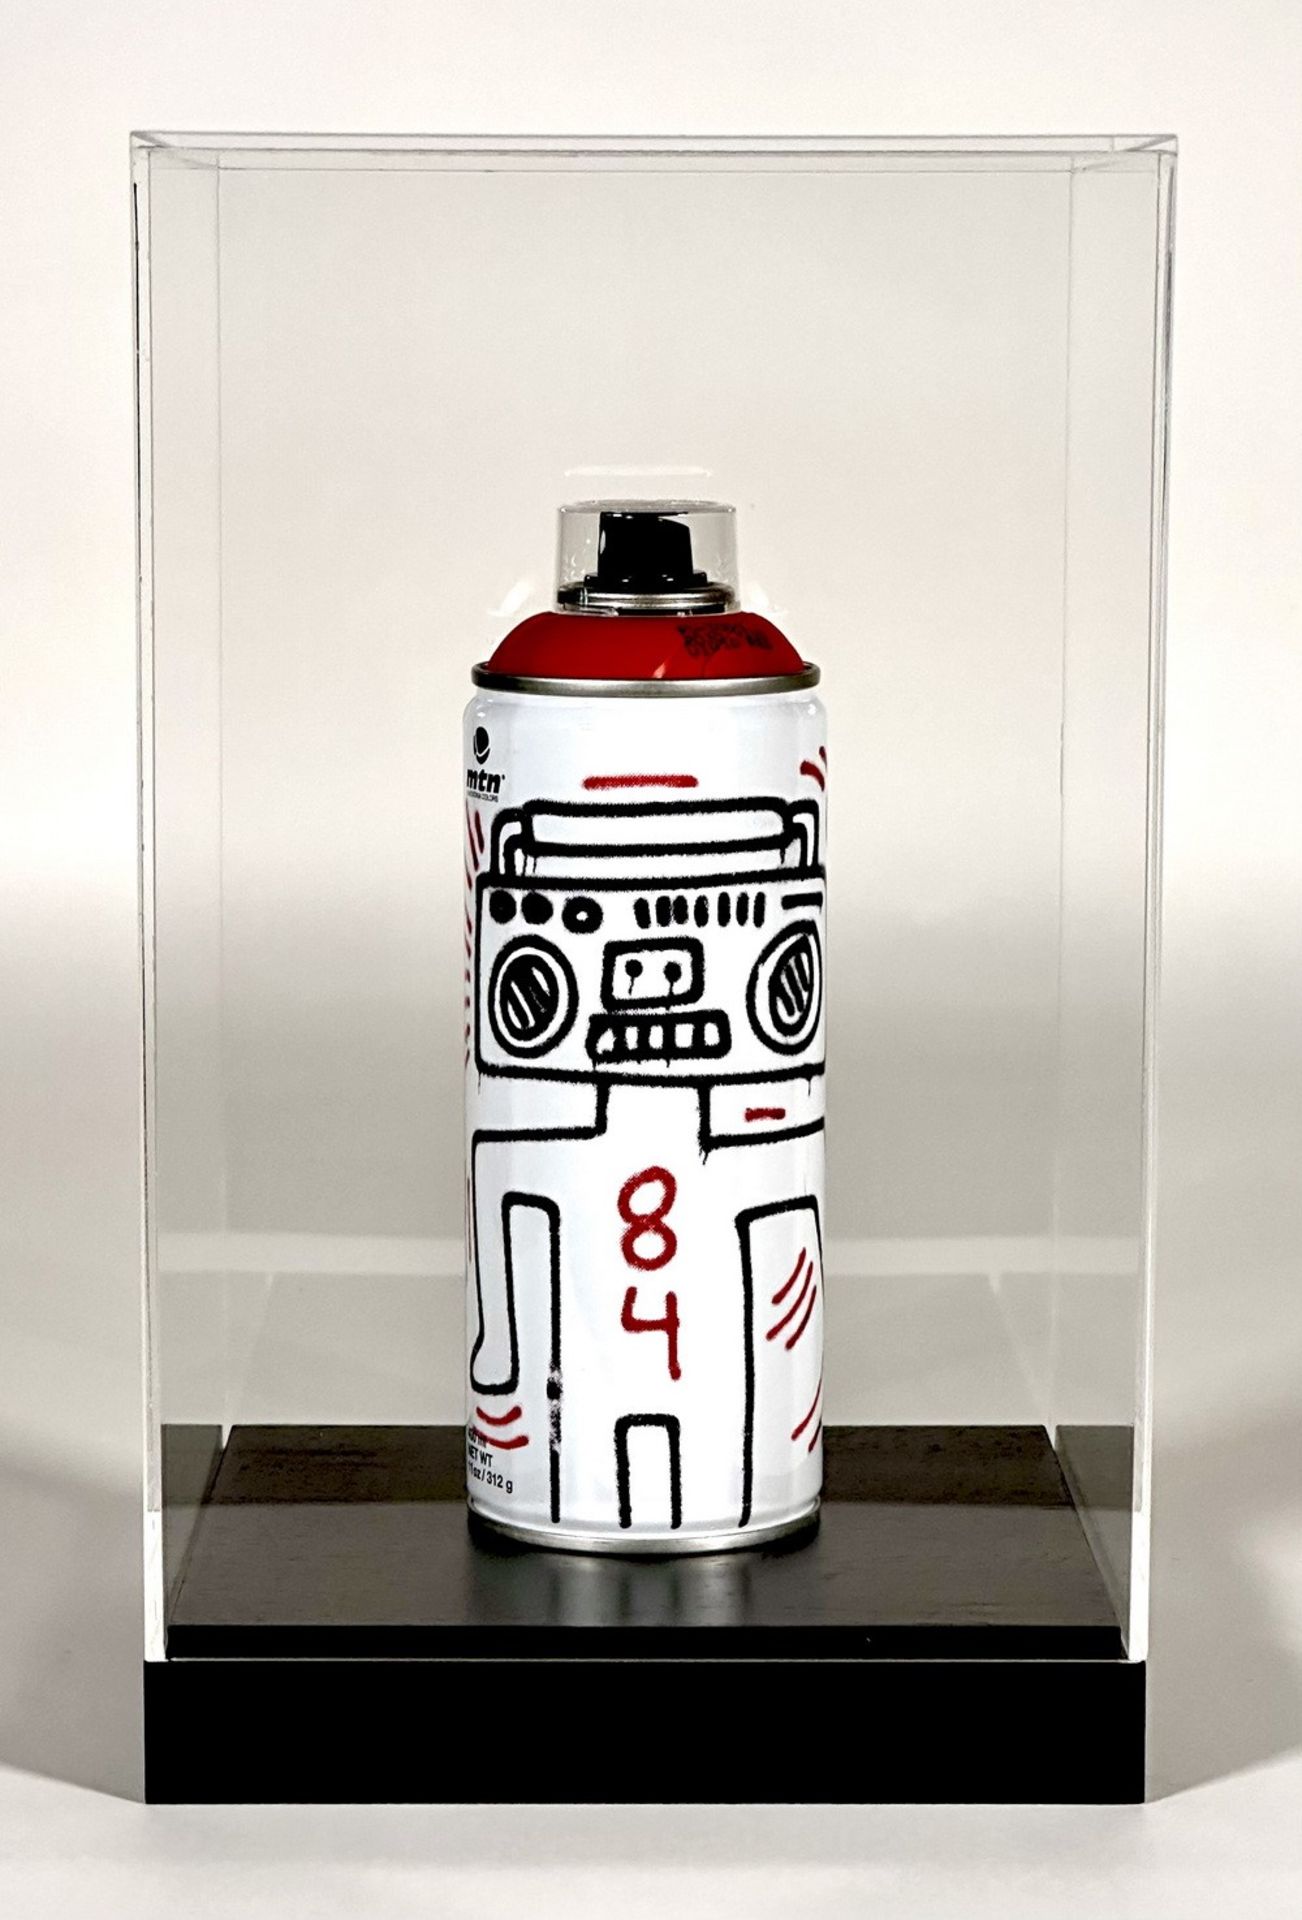 Keith HARING (After) (1958-1990)